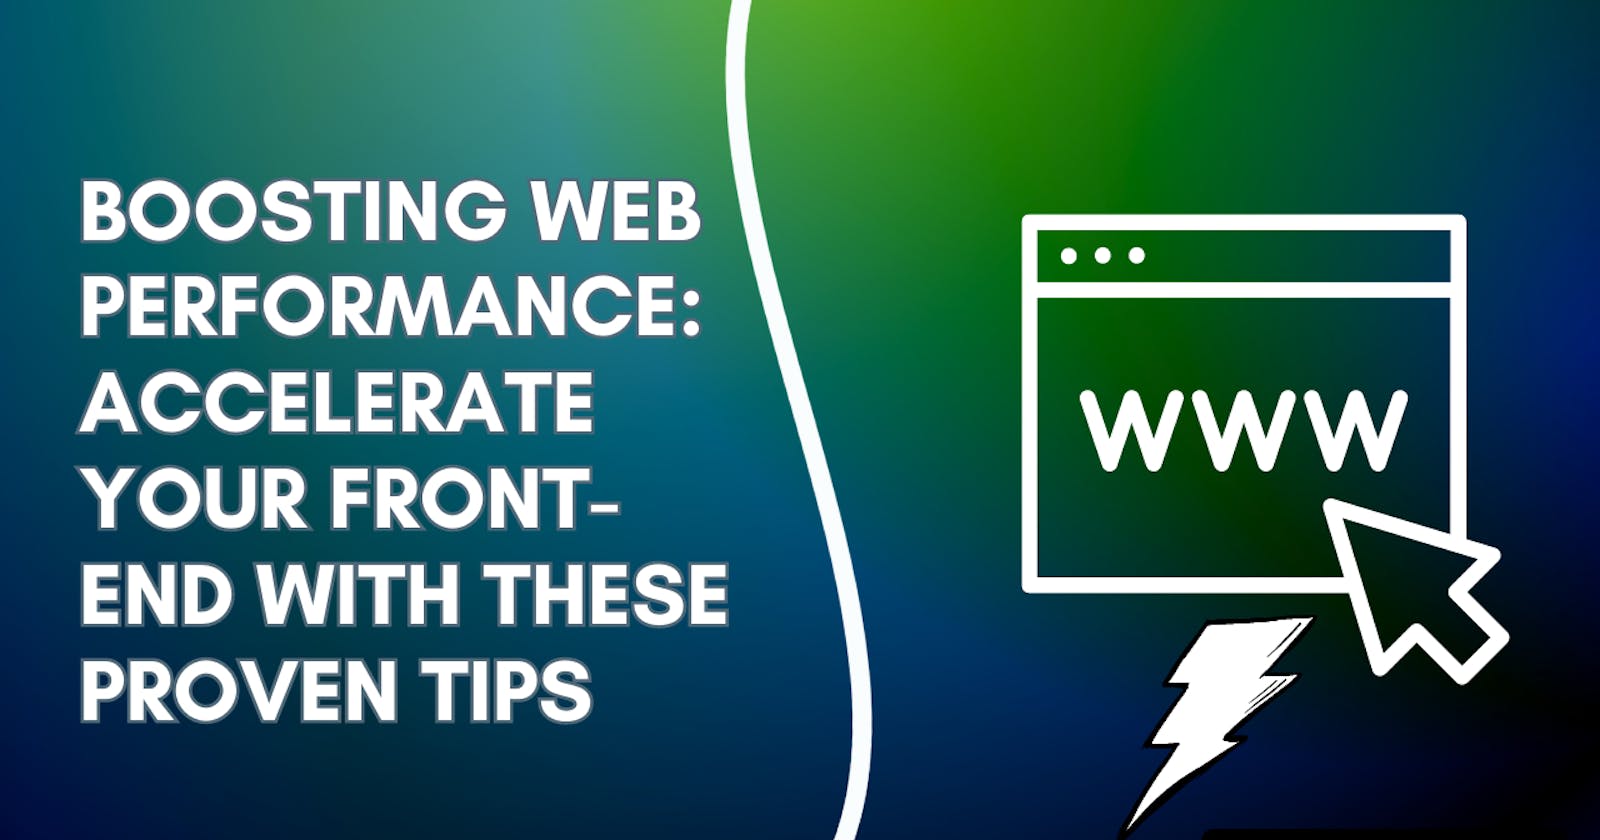 Boosting Web Performance: Accelerate Your Front-End with These Proven Tips